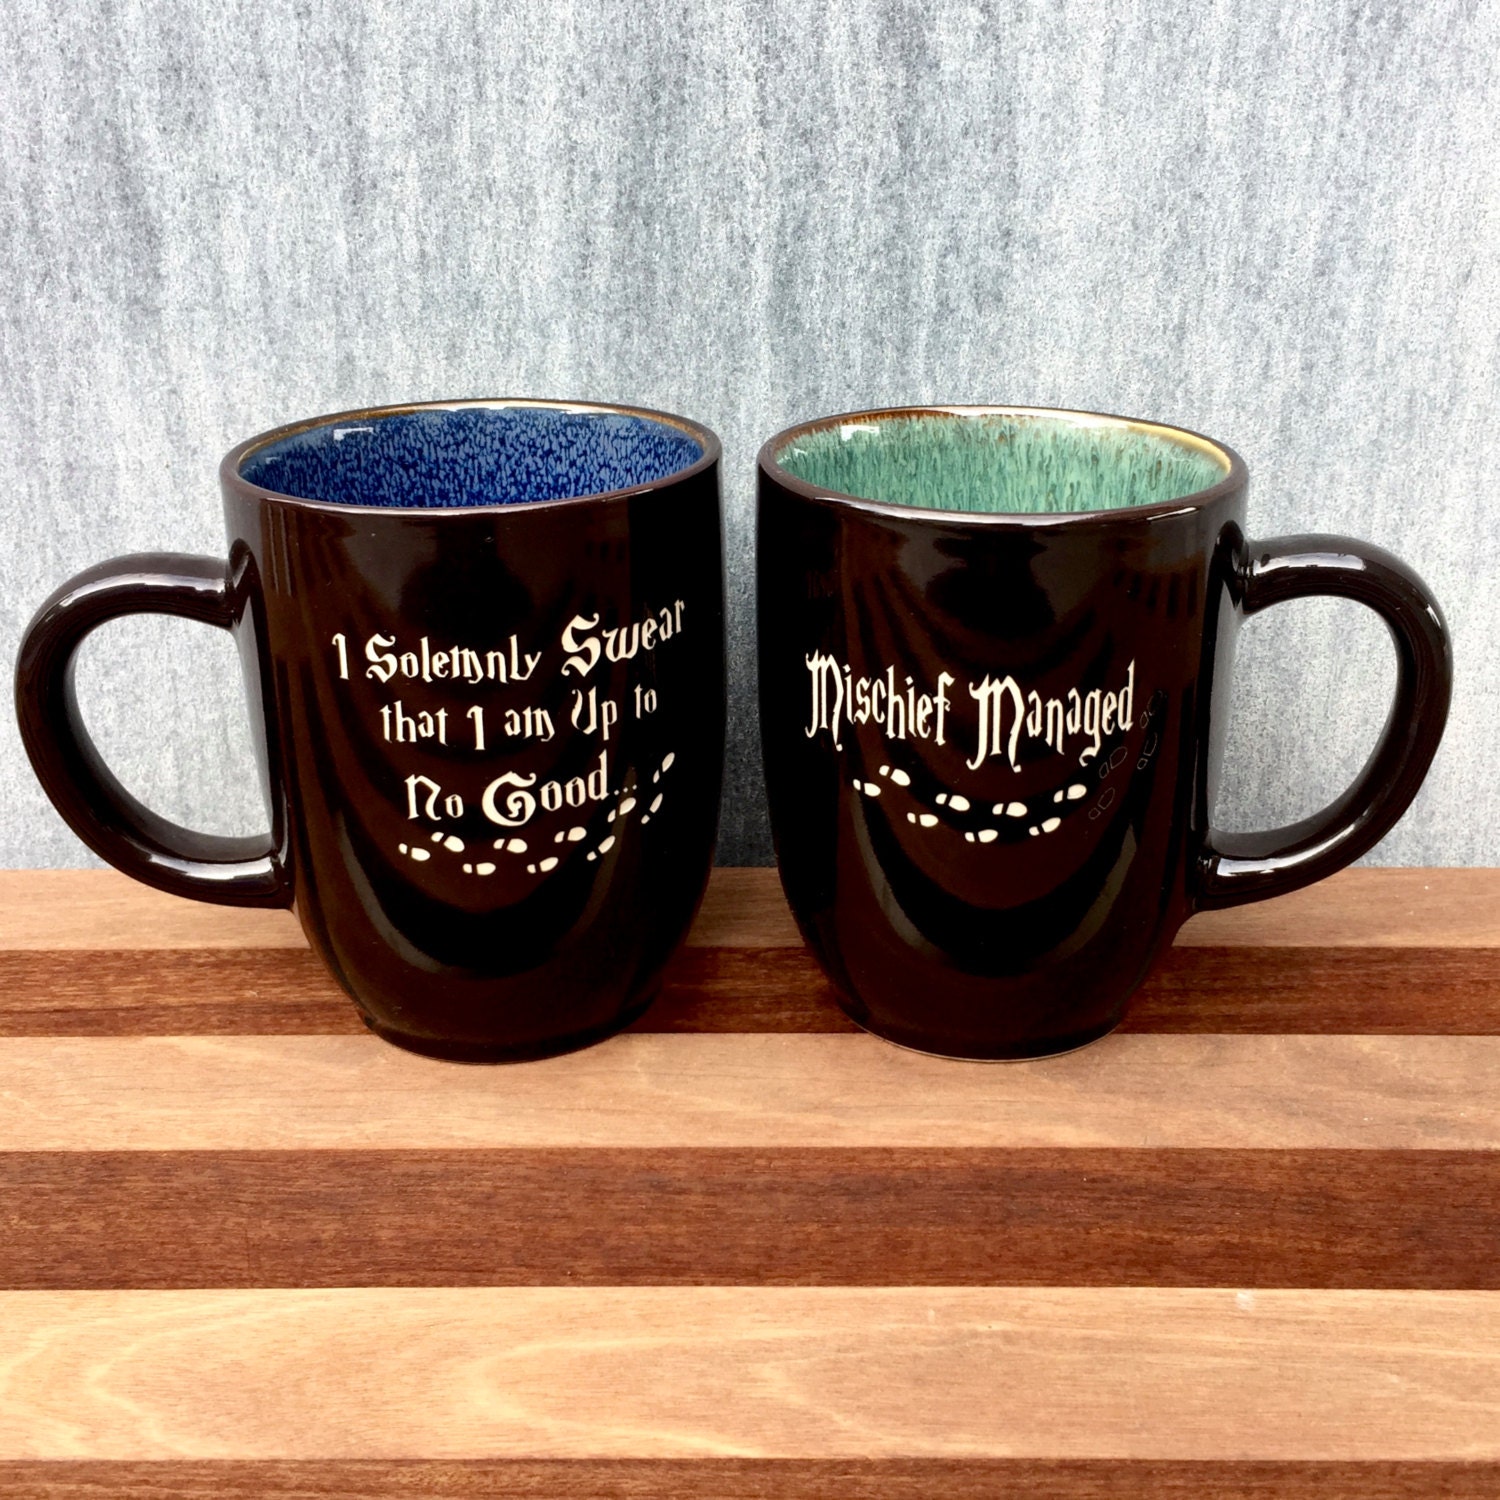 Coffee Mug with Harry Potter Quote - I Solemnly Swear that I'm Up To No Good and Mischief Managed Set